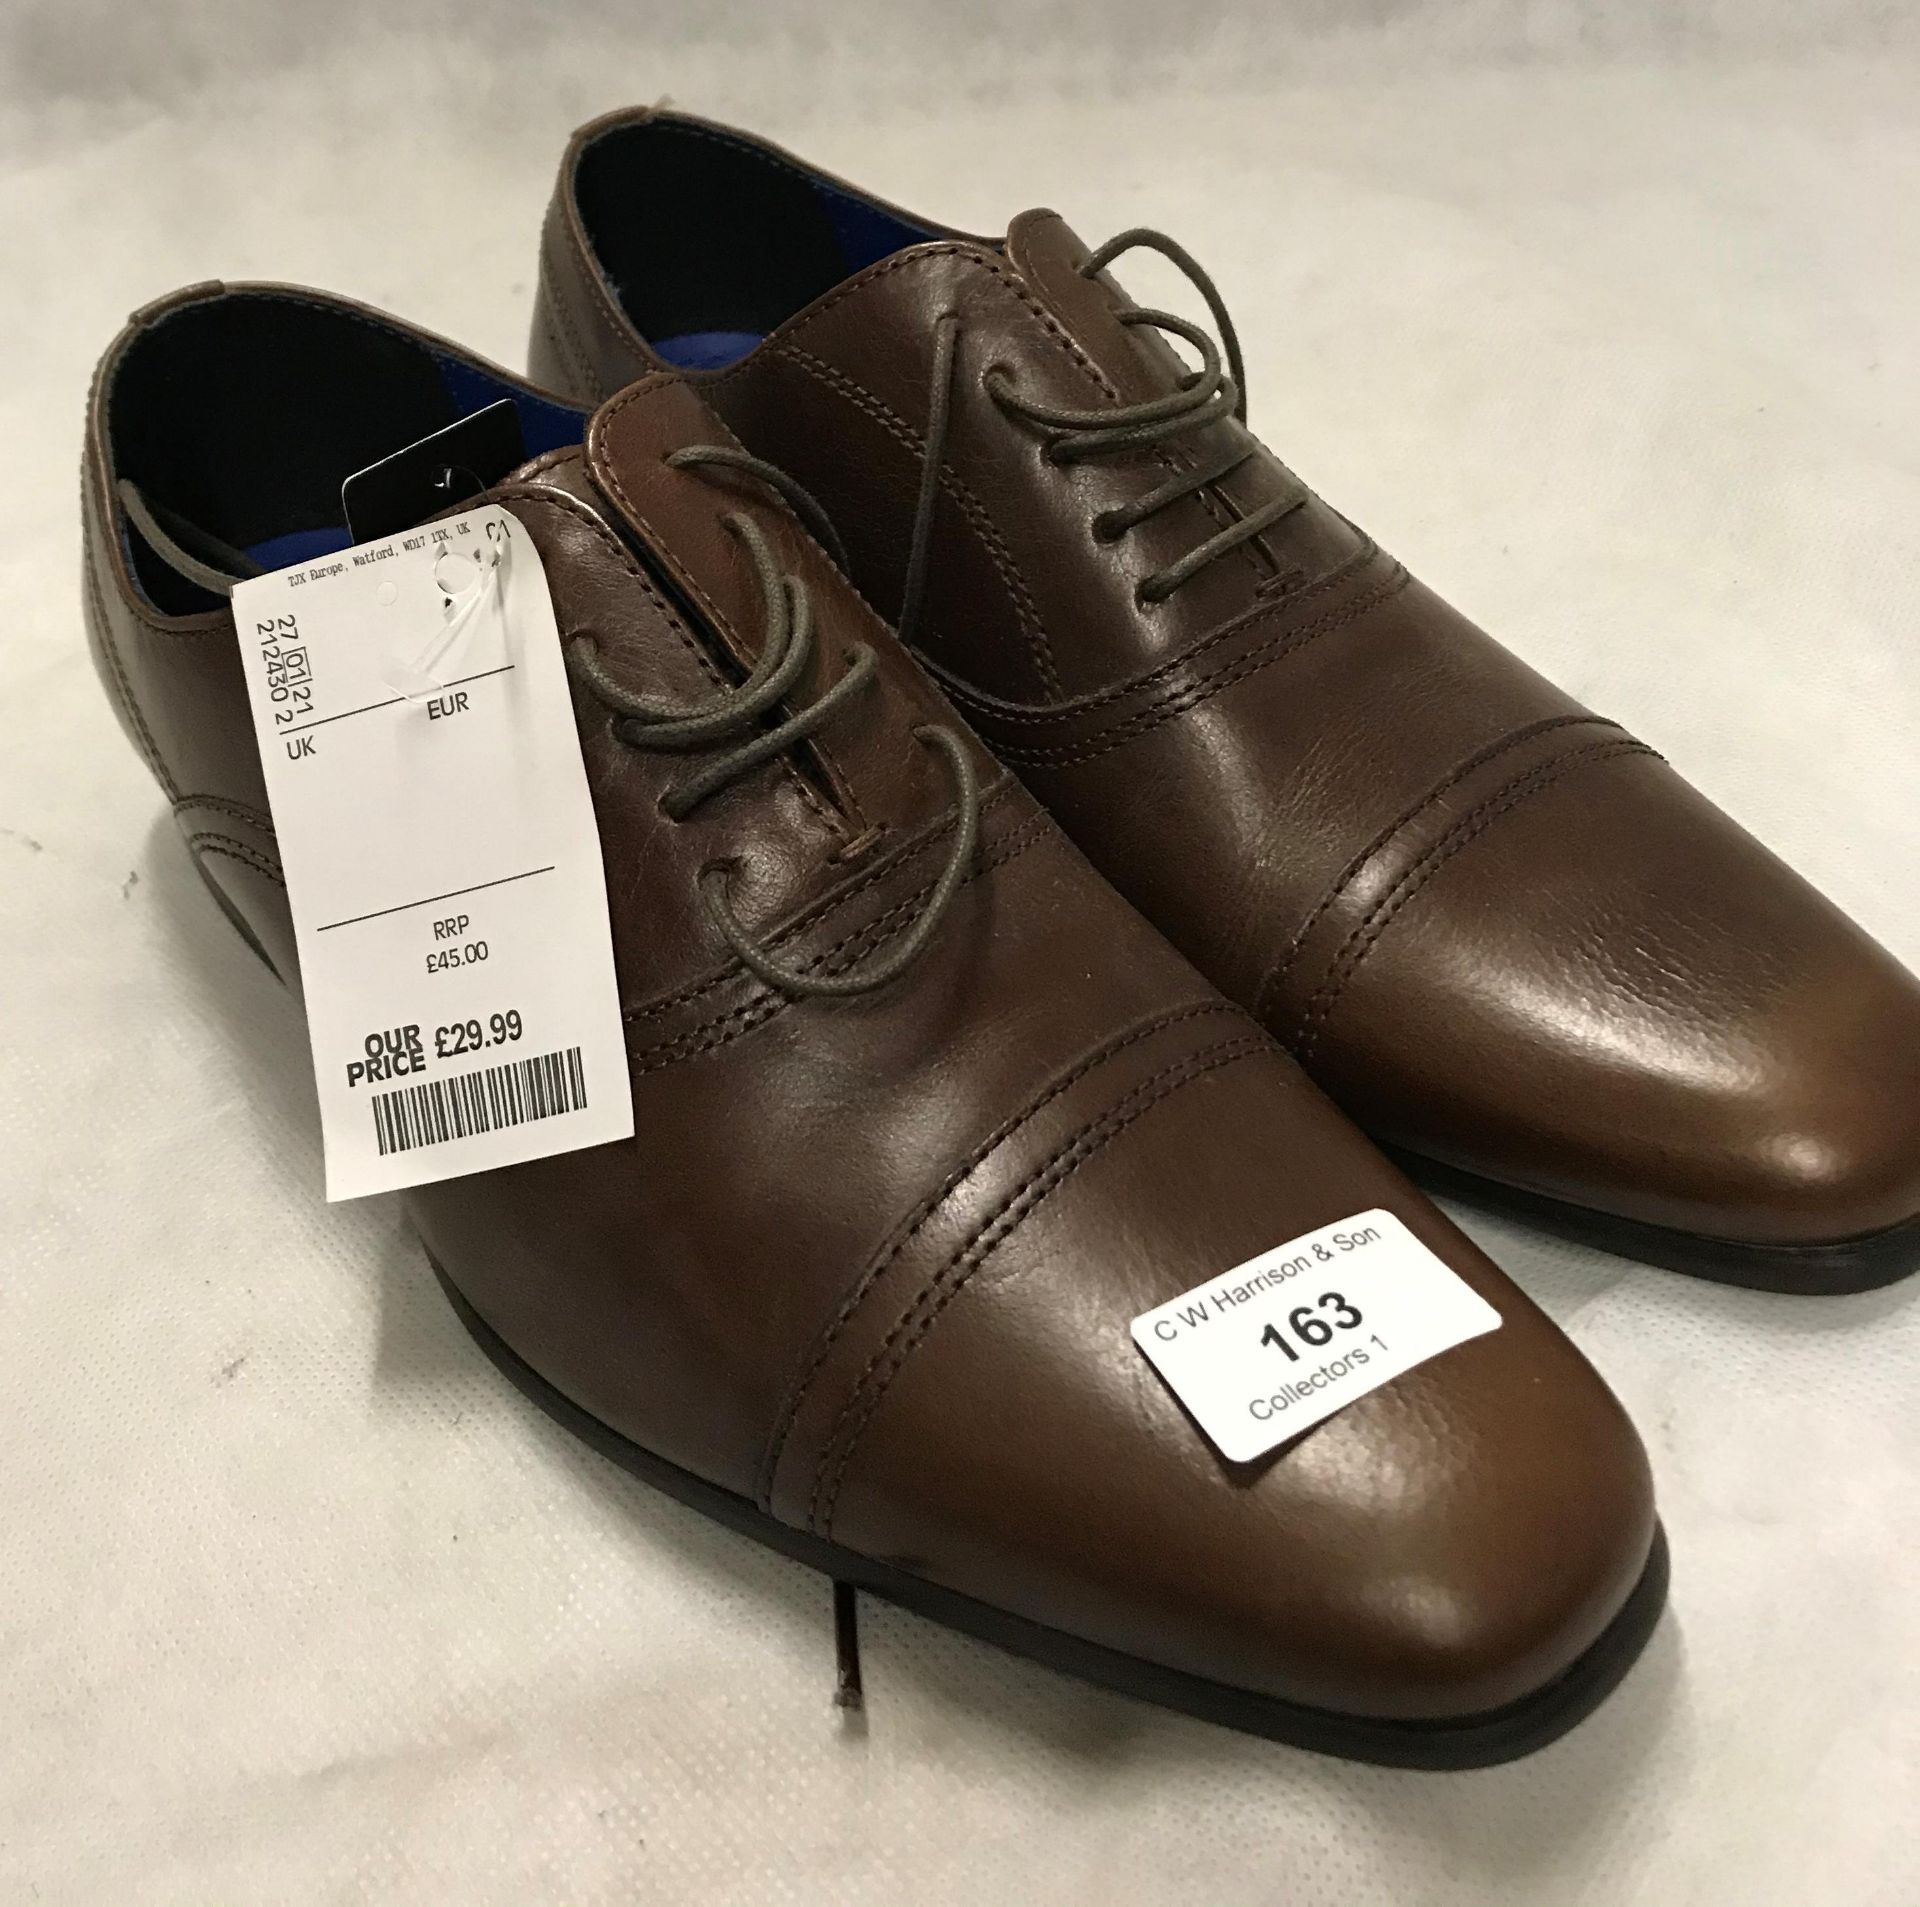 A pair of Red Tape brown leather men's shoes RRP £29.